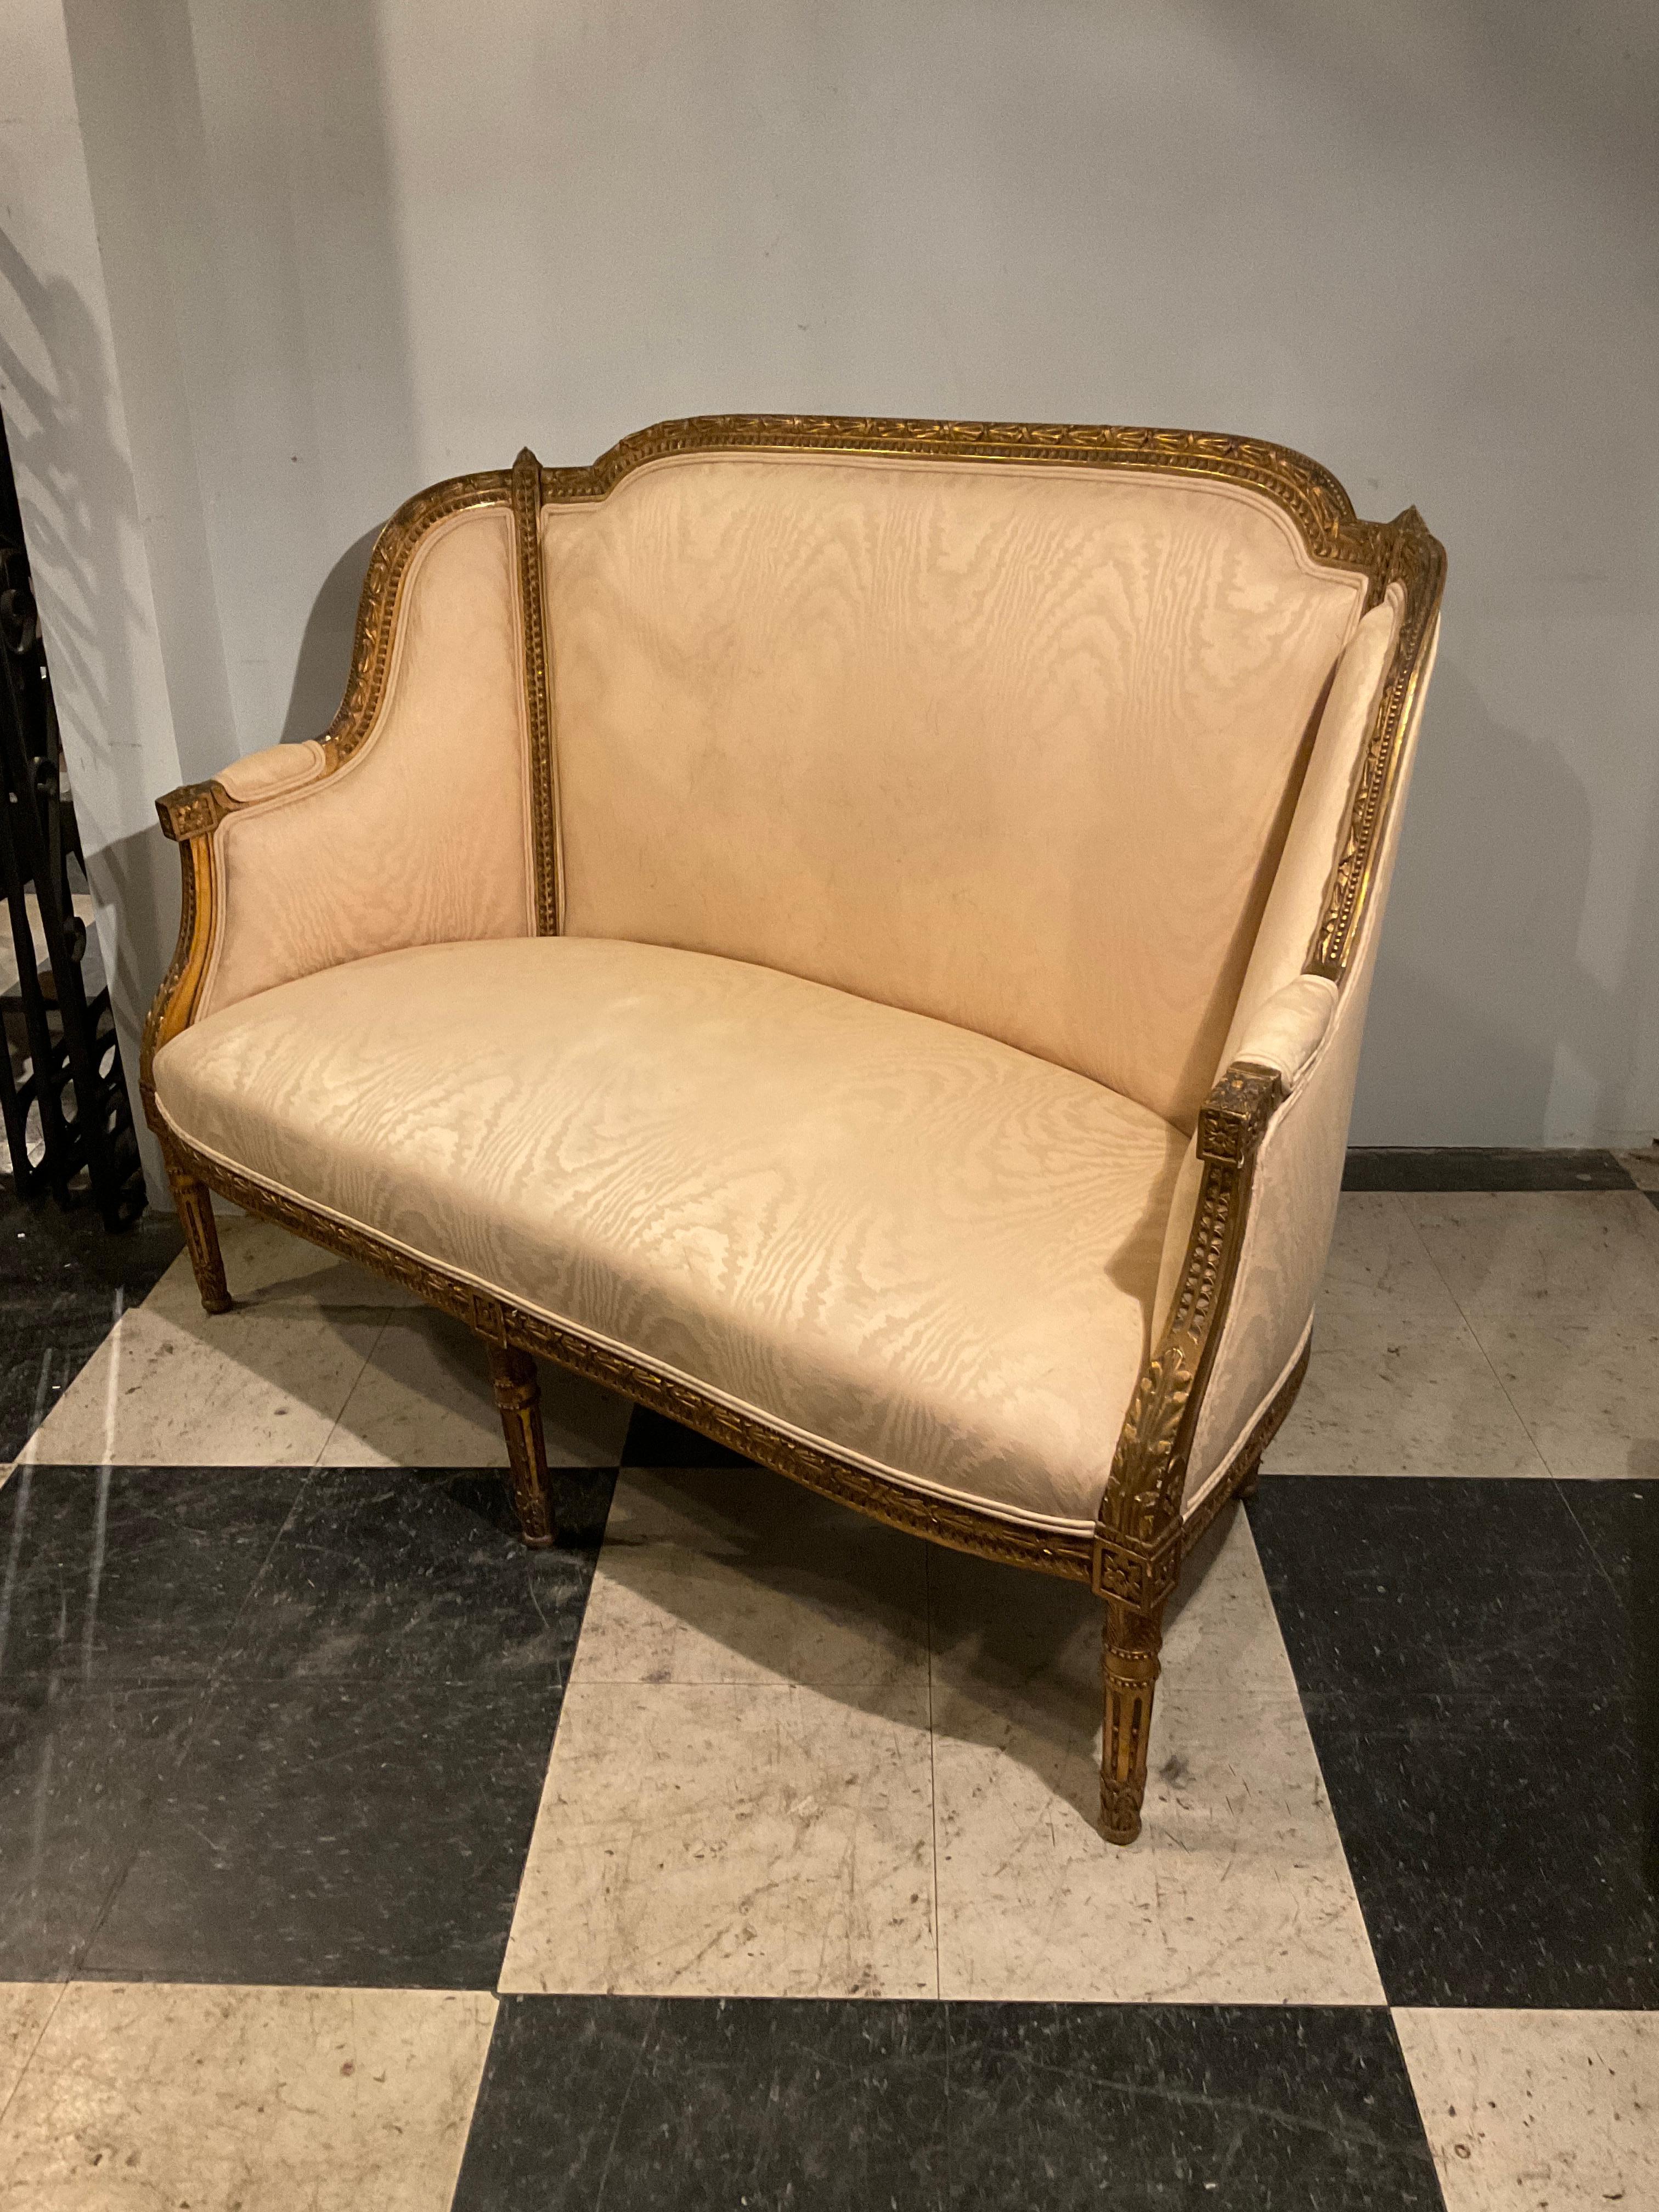 1870 s French Gilt Wood Louis XVI Settee In Good Condition For Sale In Tarrytown, NY